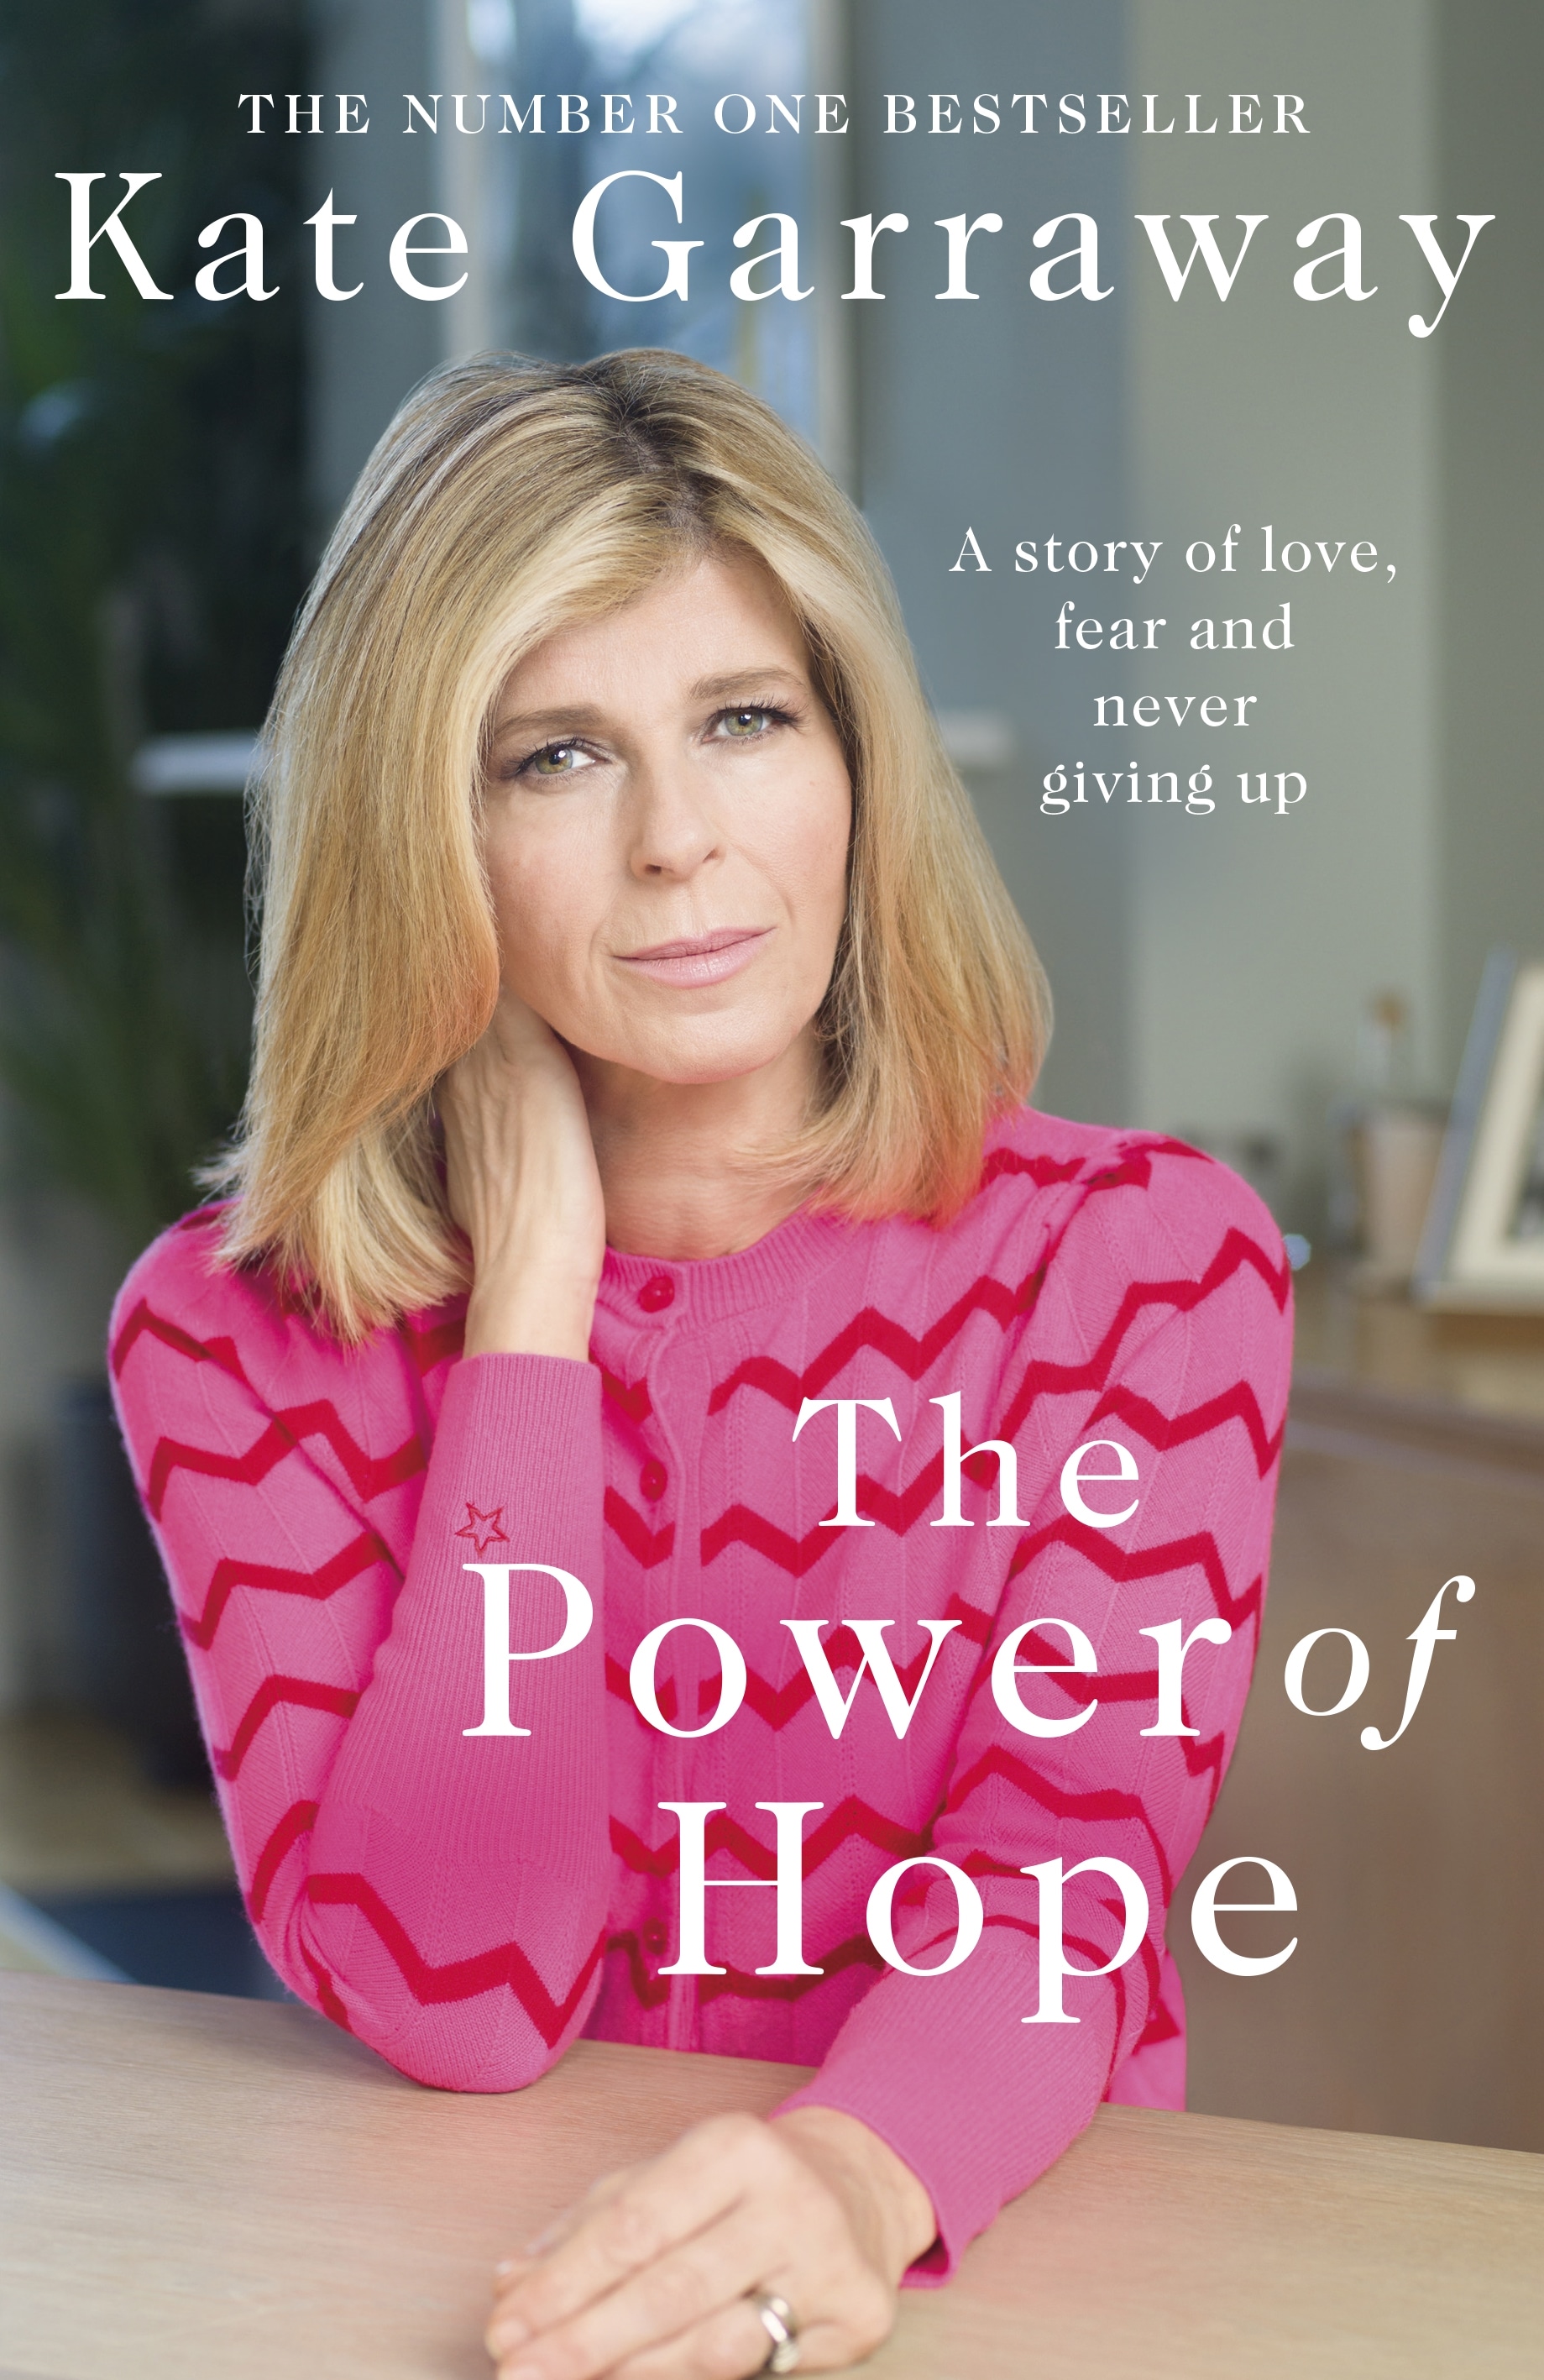 Book “The Power Of Hope” by Kate Garraway — February 17, 2022